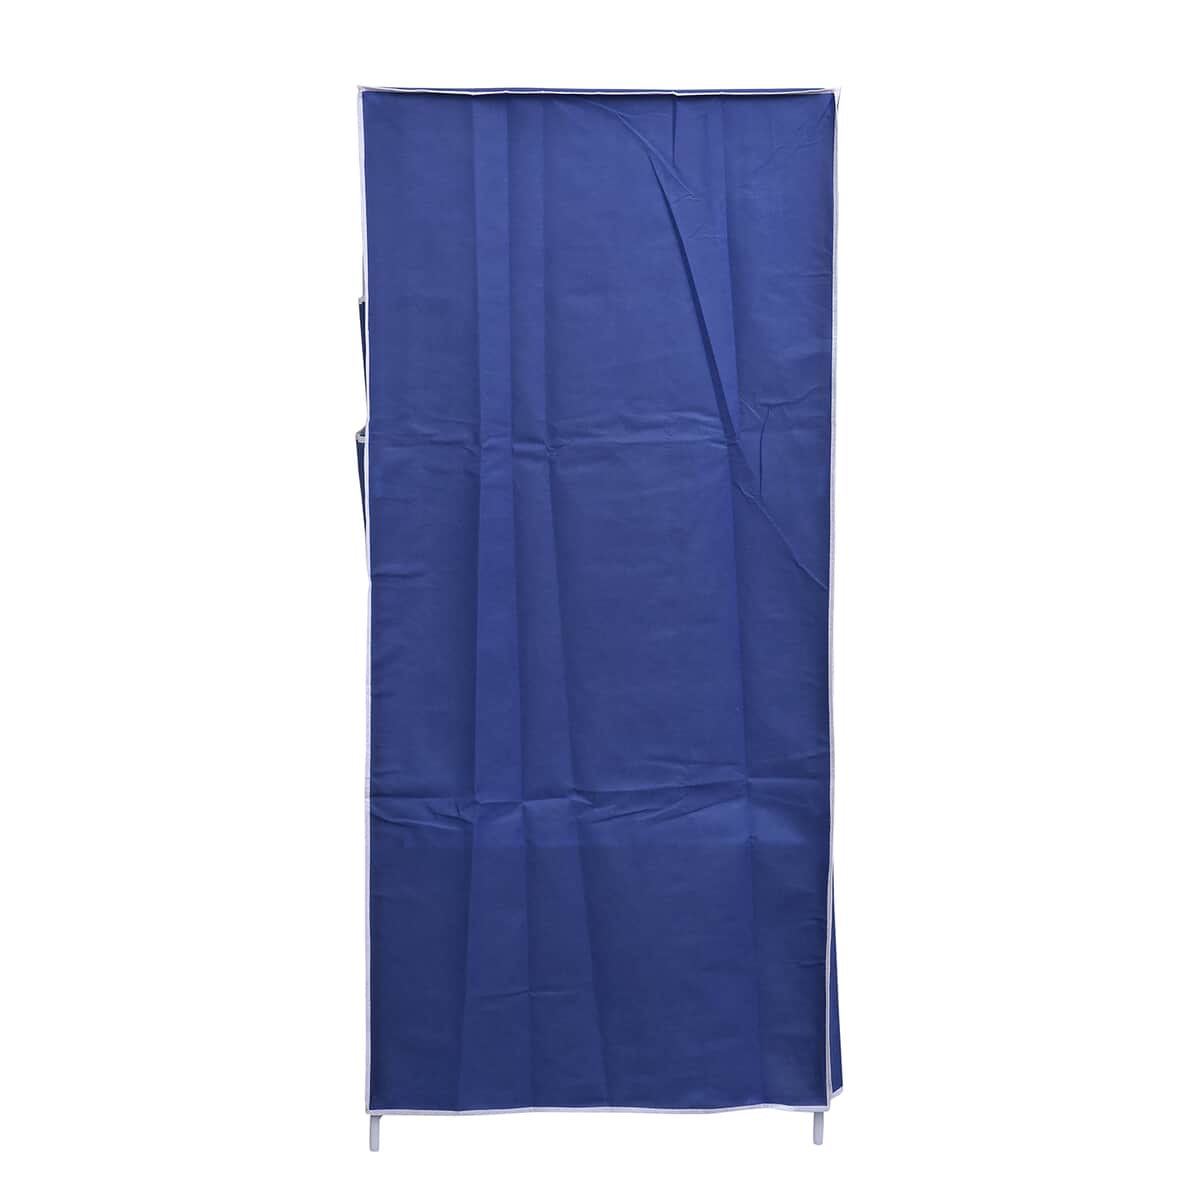 Blue Collapsible Wardrobe with 2 Outer pockets and Zippered Door (27"x17"X59") (Non-Woven Fabric) image number 4